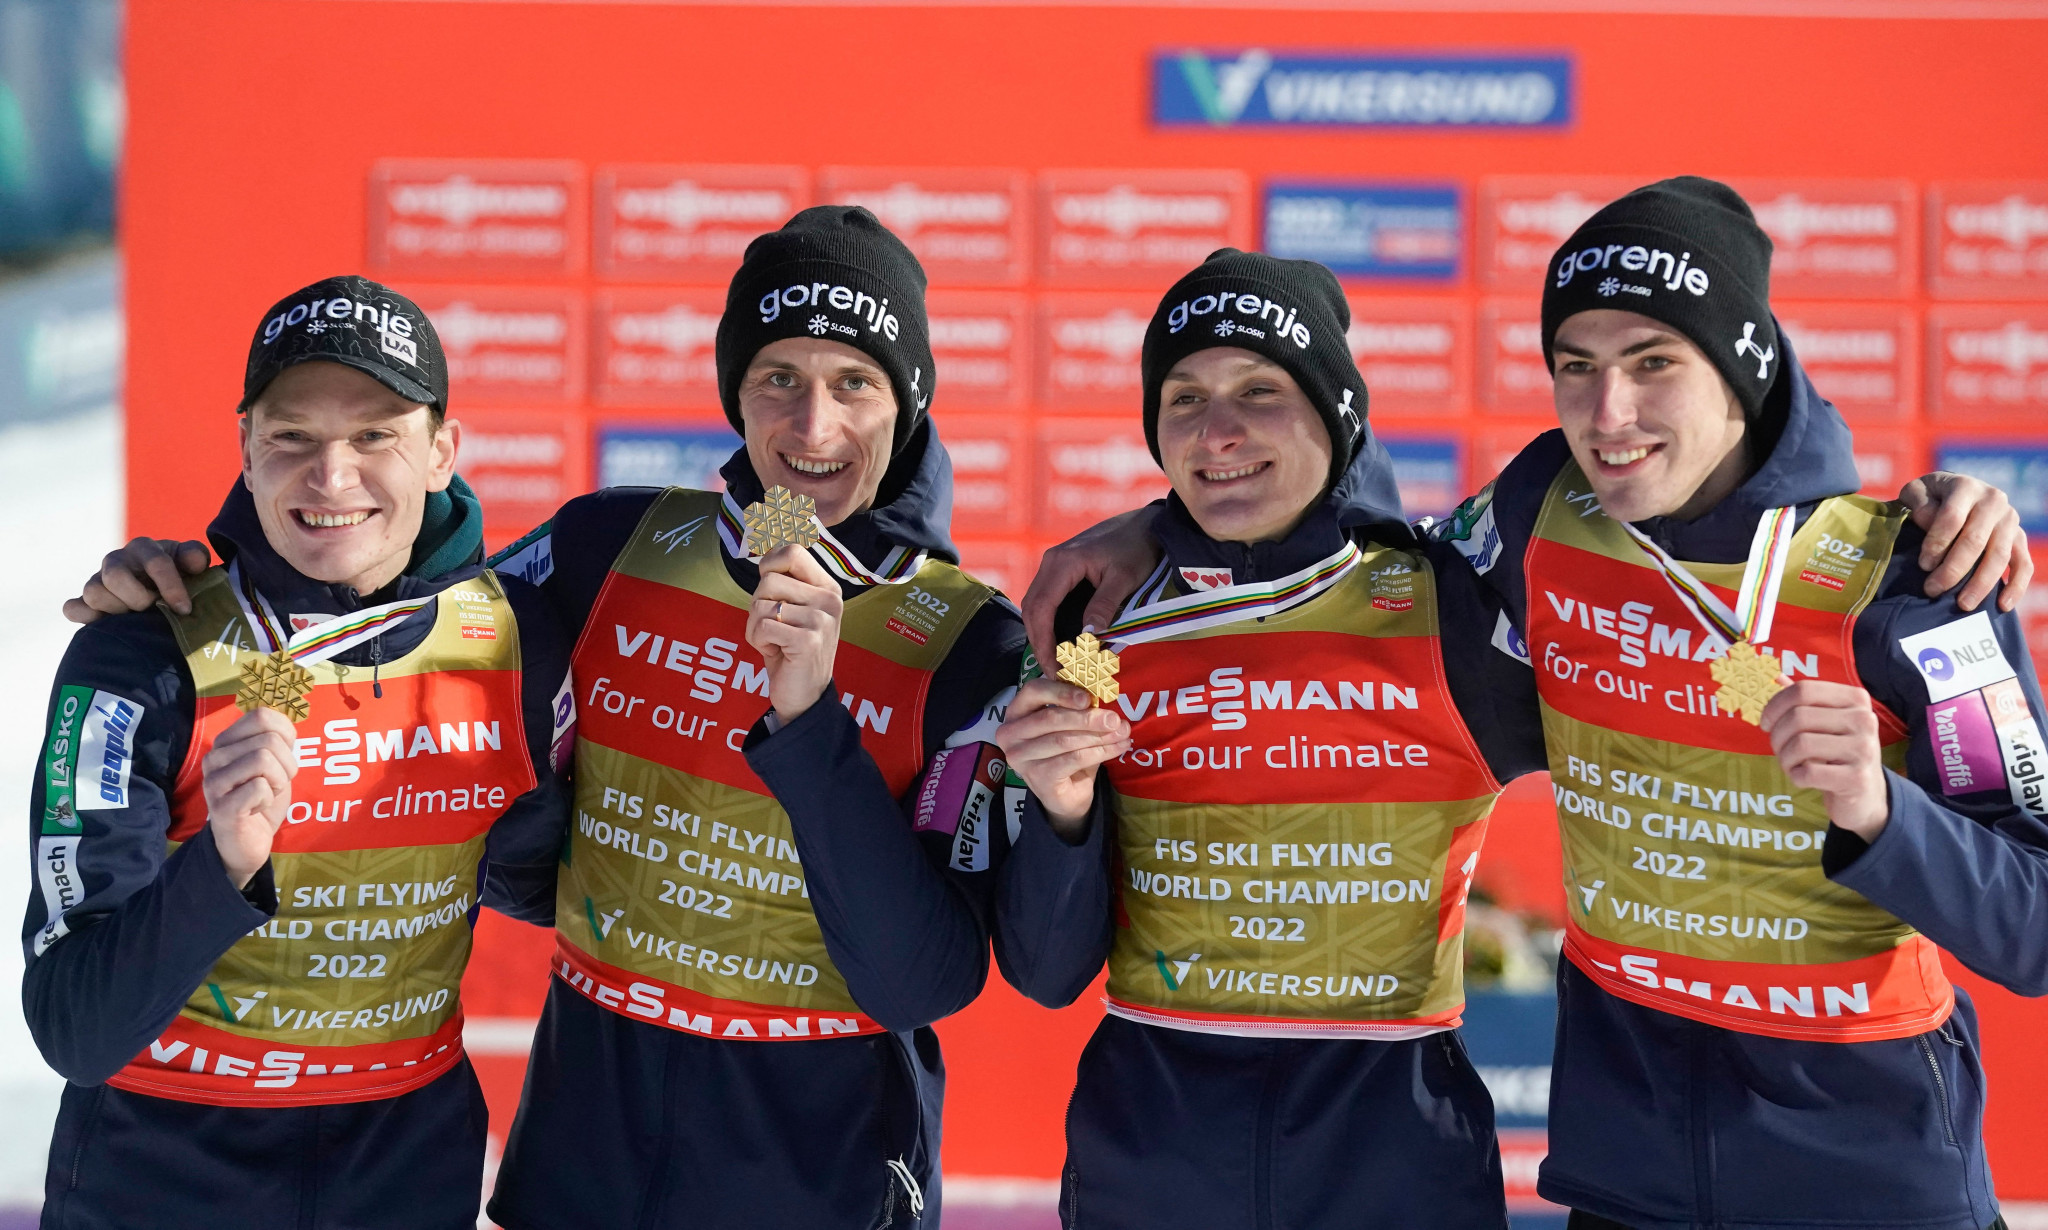 Slovenia won the team title at the FIS Ski Flying World Championships for the first time in Vikersund ©Getty Images